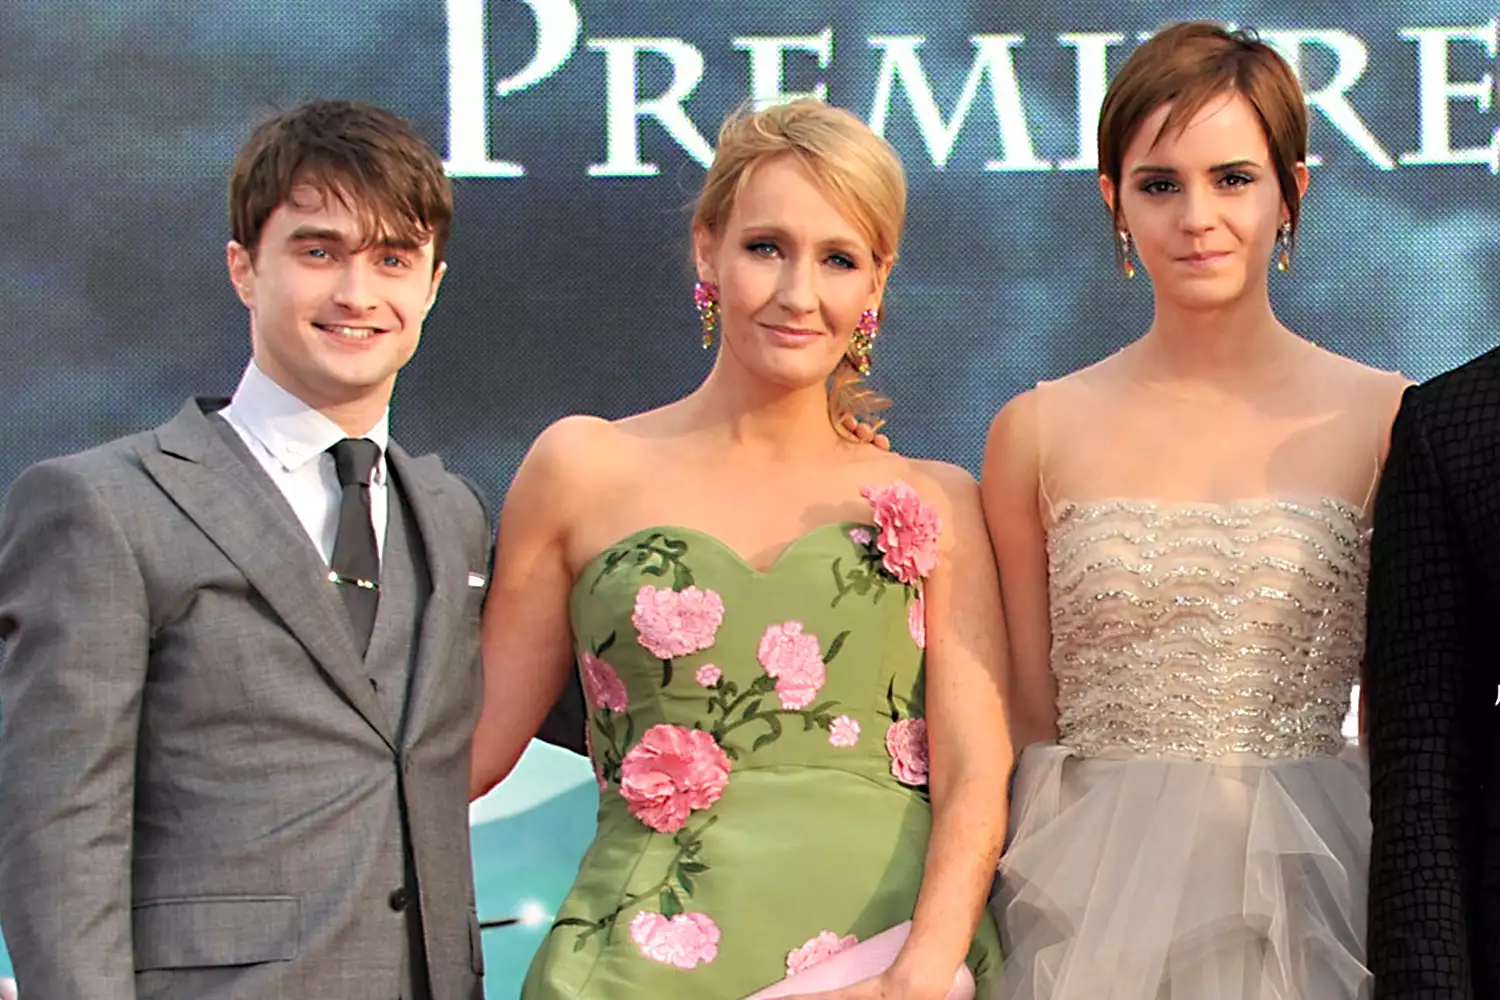 J.k. Rowling Says She'Ll Never Forgive Emma Watson And Daniel Radcliffe: They Can 'Save Their Apologies'